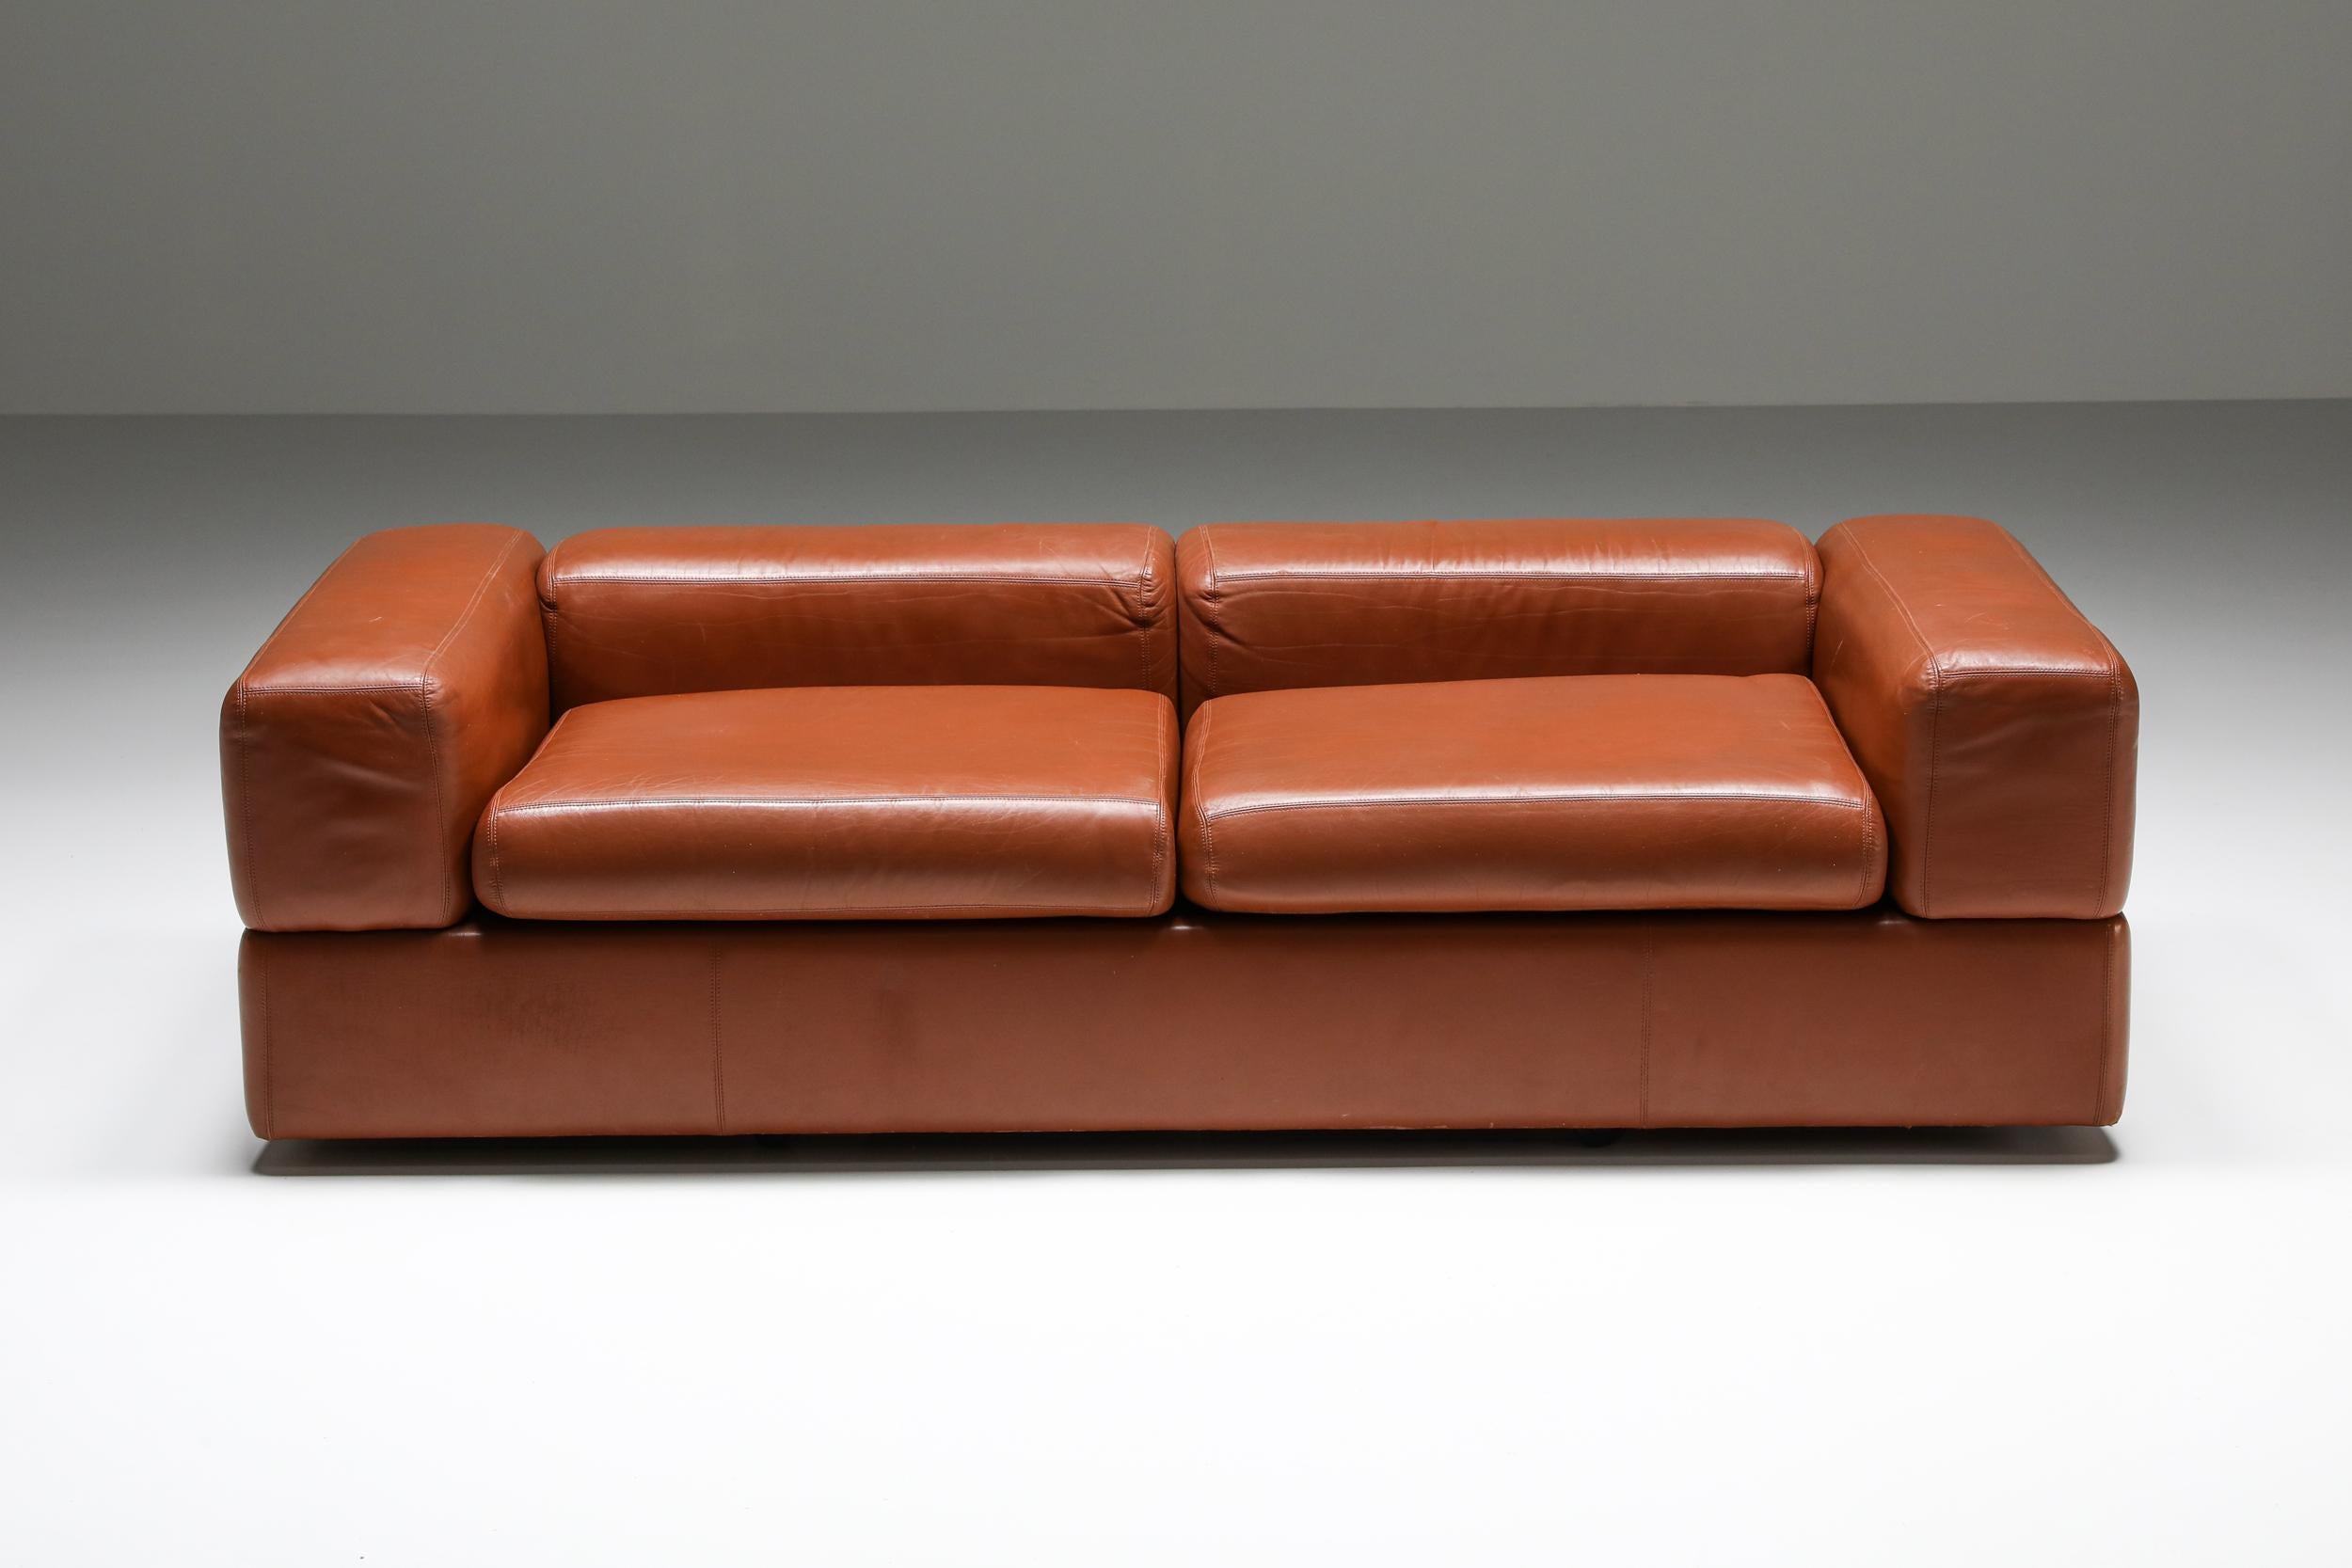 Post-Modern Postmodern Two-Seater Sofa by Tito Agnoli for Cinova in Cognac Leather, 1960's